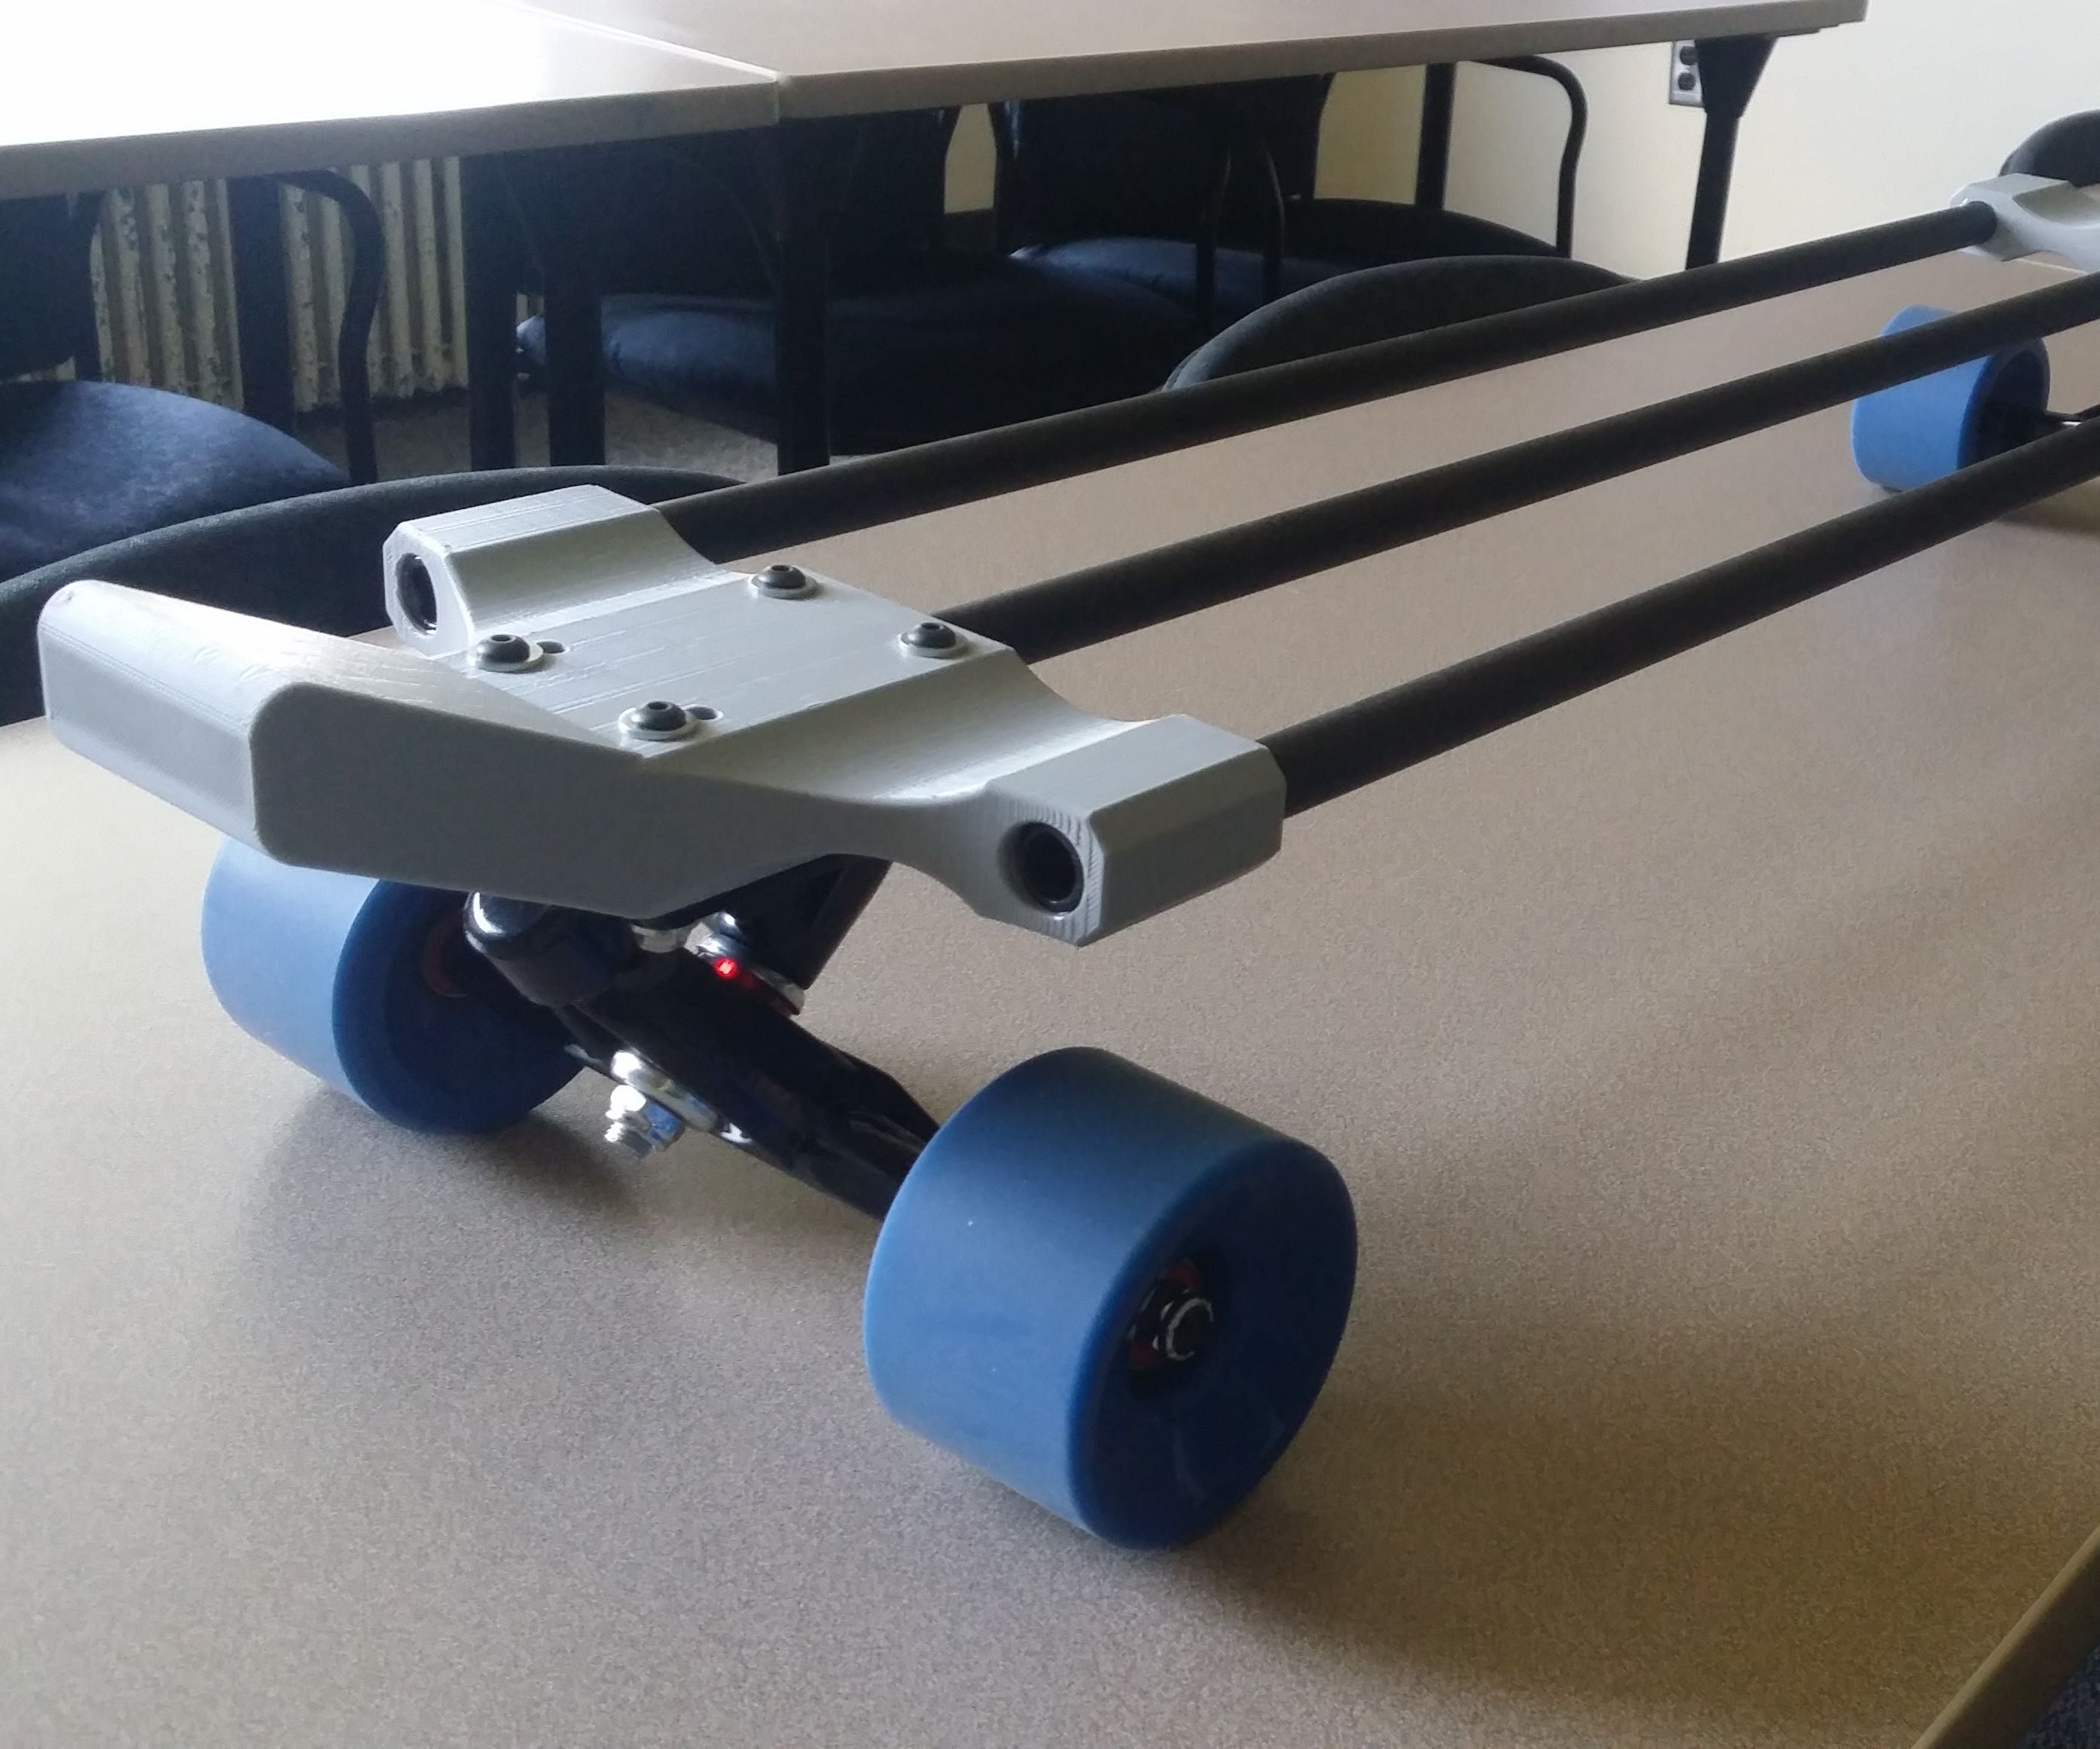 How to Design a Skateboard Frame Using Science